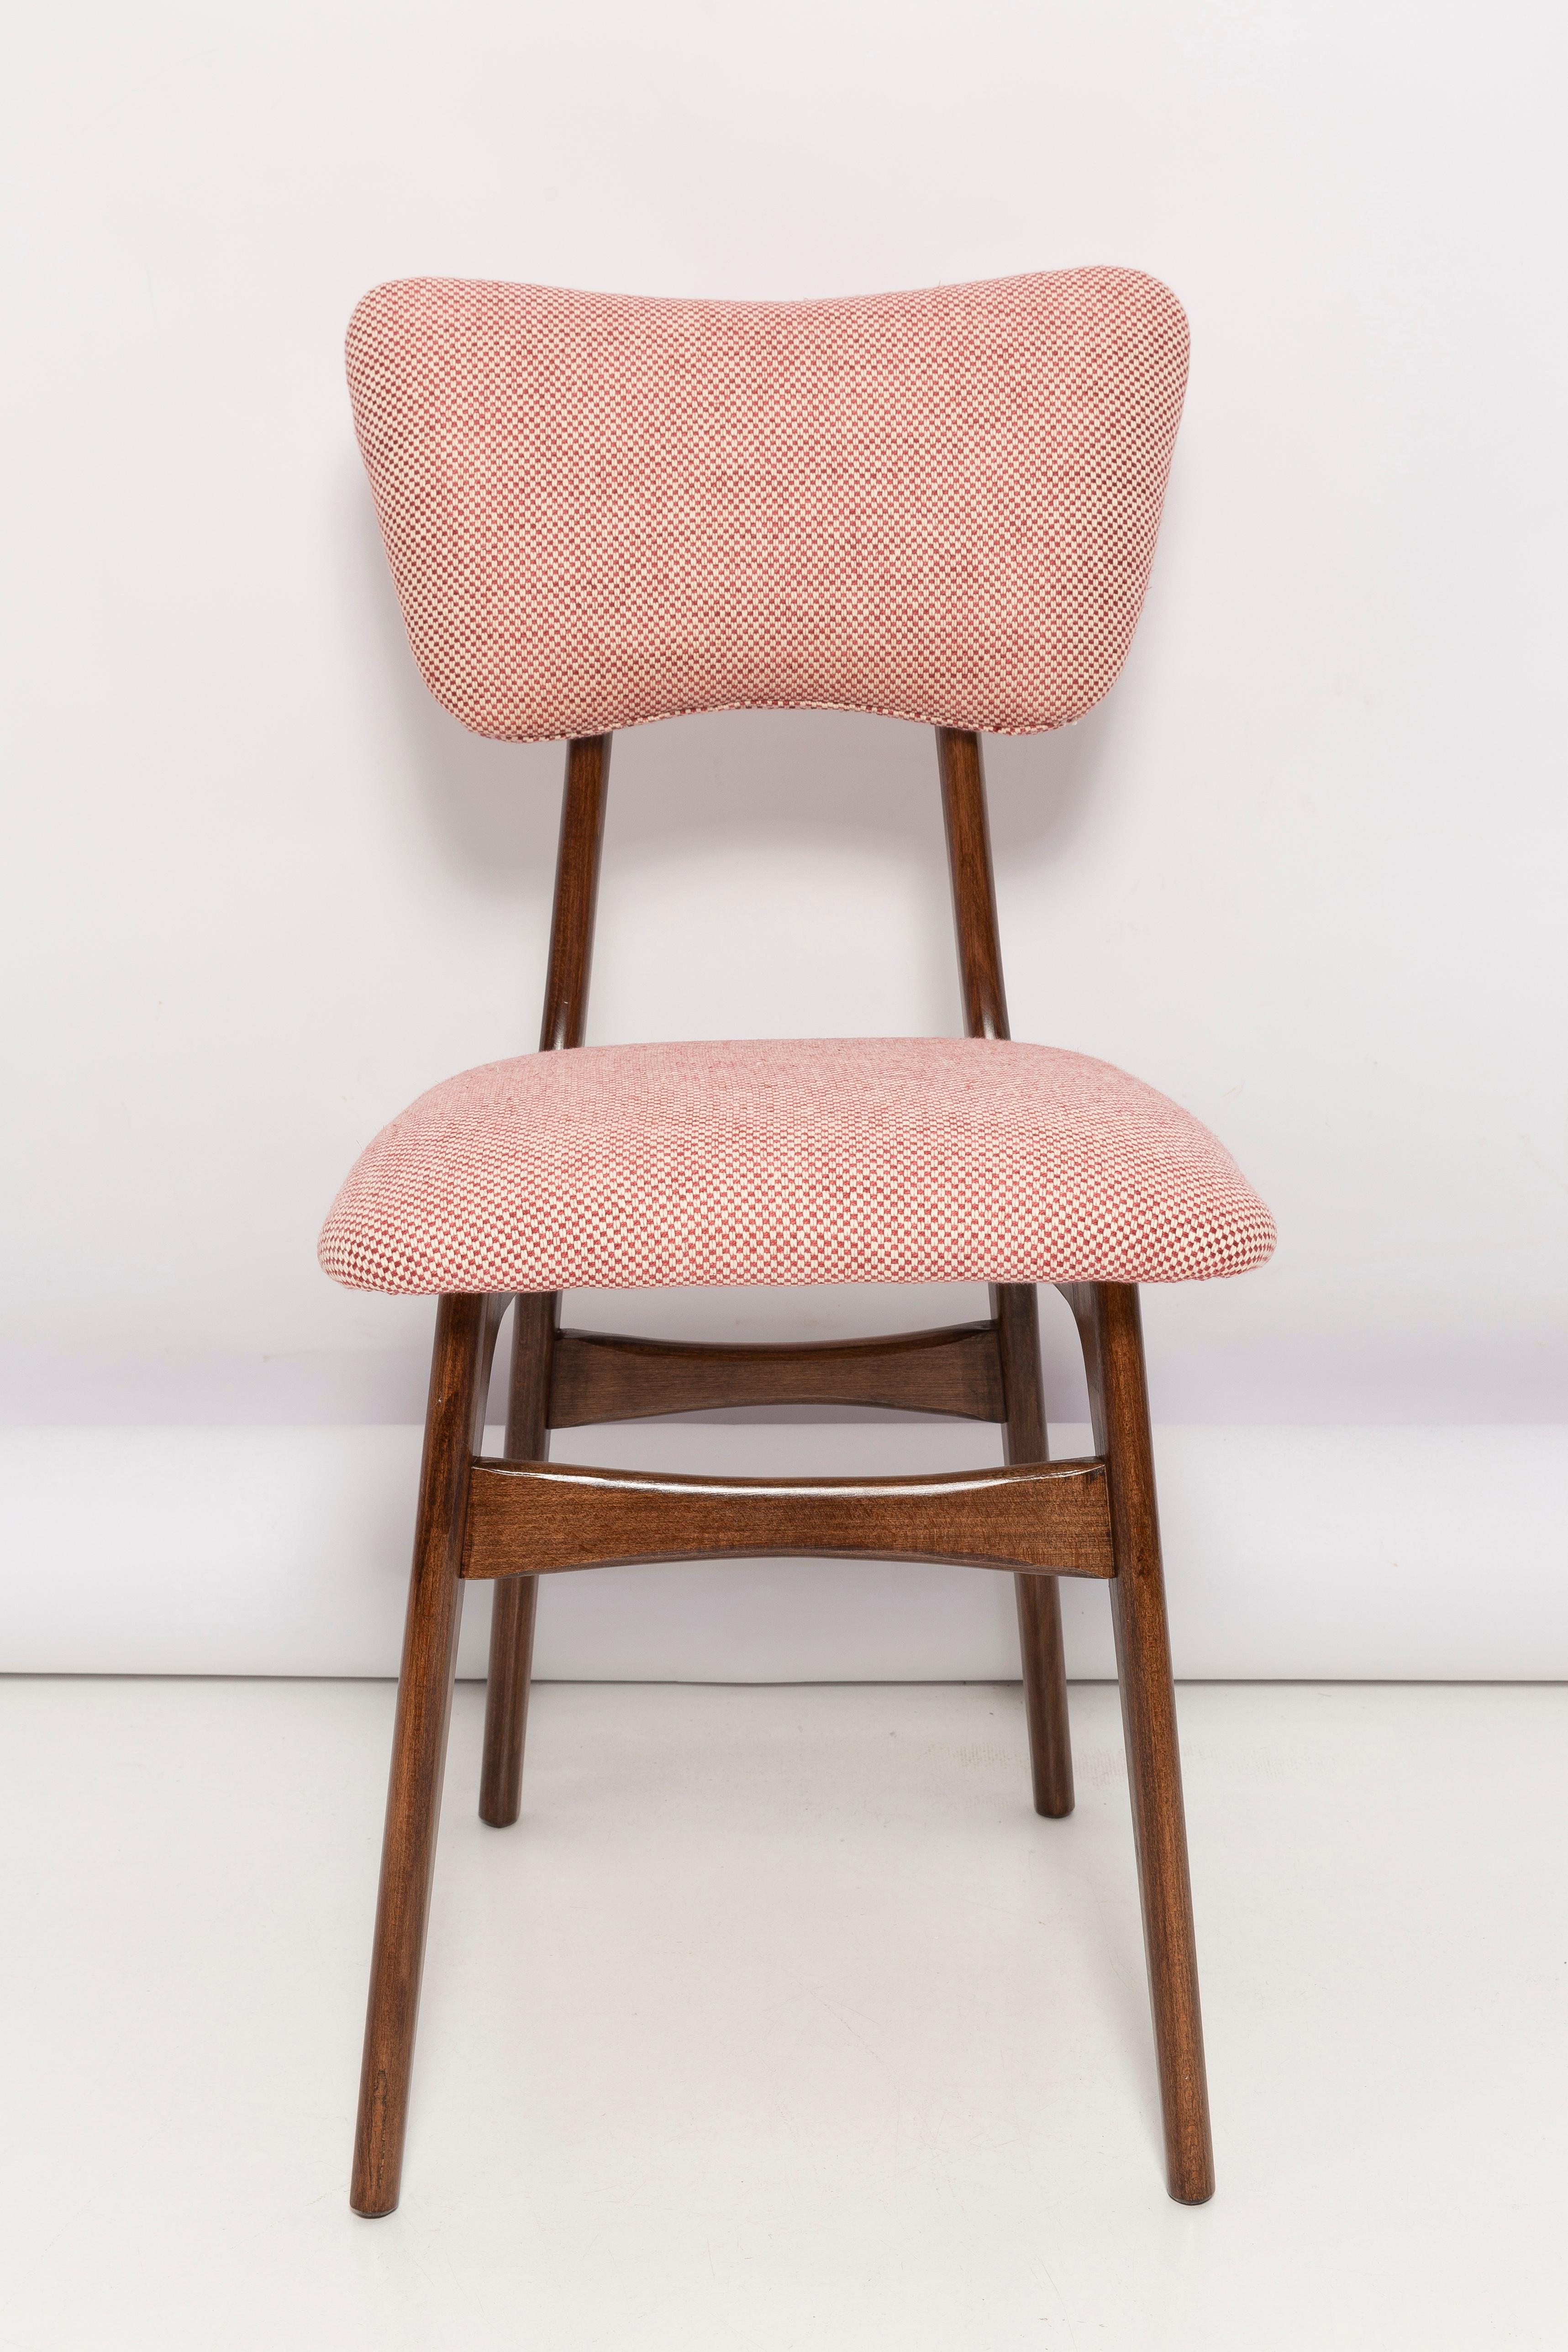 Polish Set of Eight Mid Century Butterfly Dining Chairs, Peony Cotton, Poland, 1960s For Sale